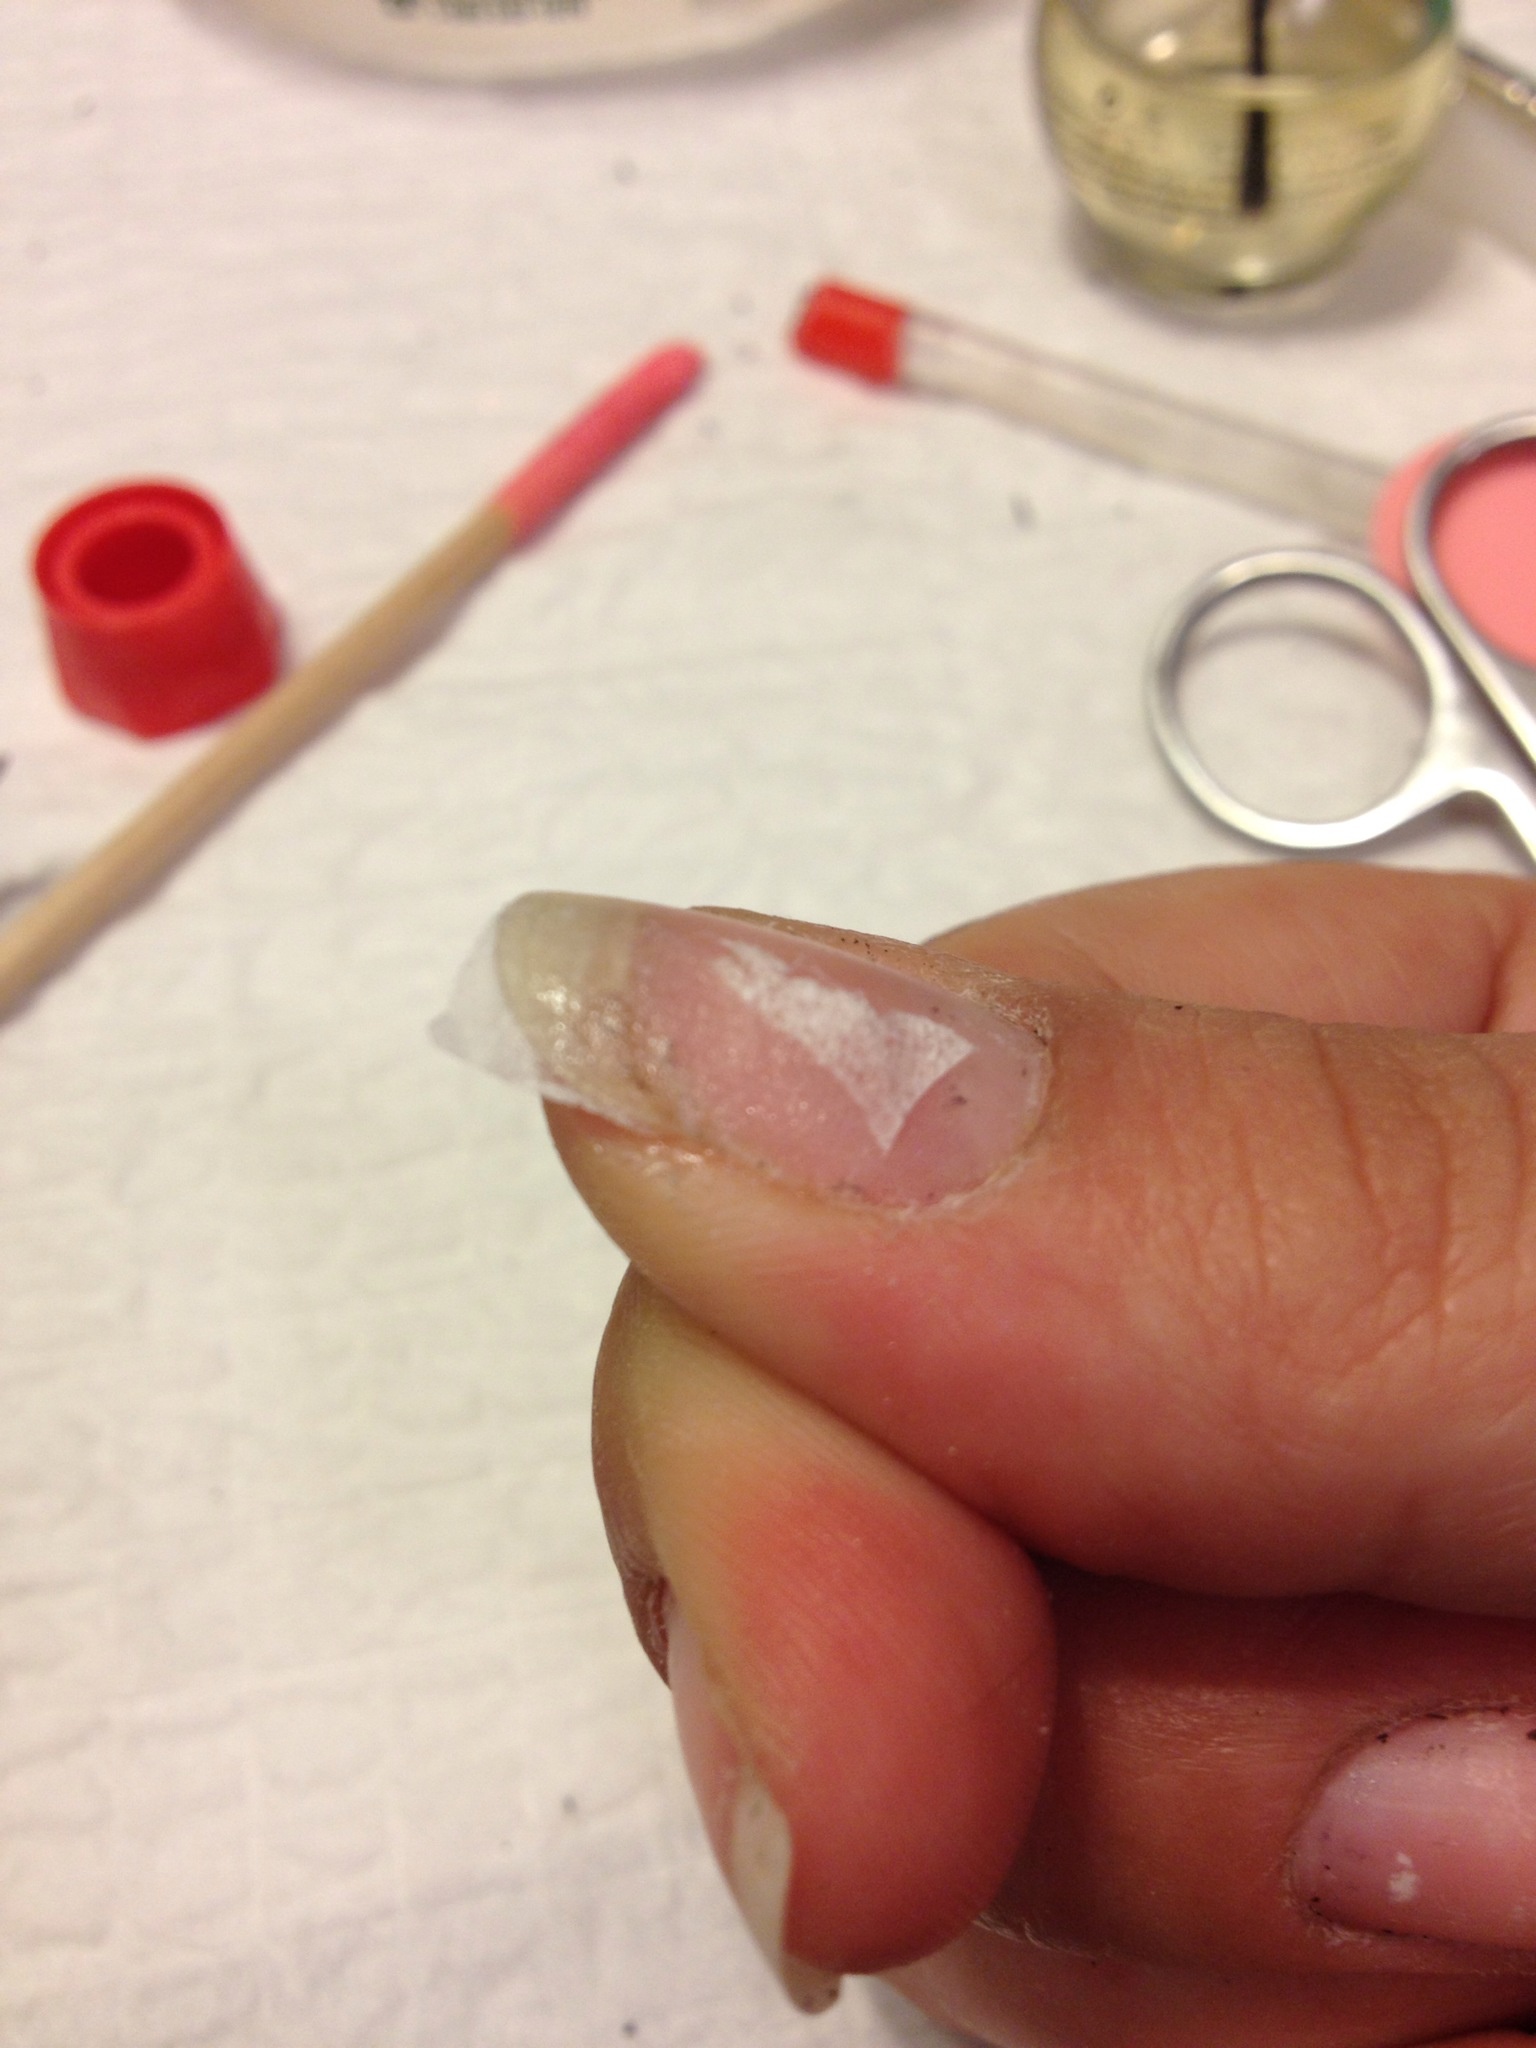 How to fix a cracked nail - B+C Guides